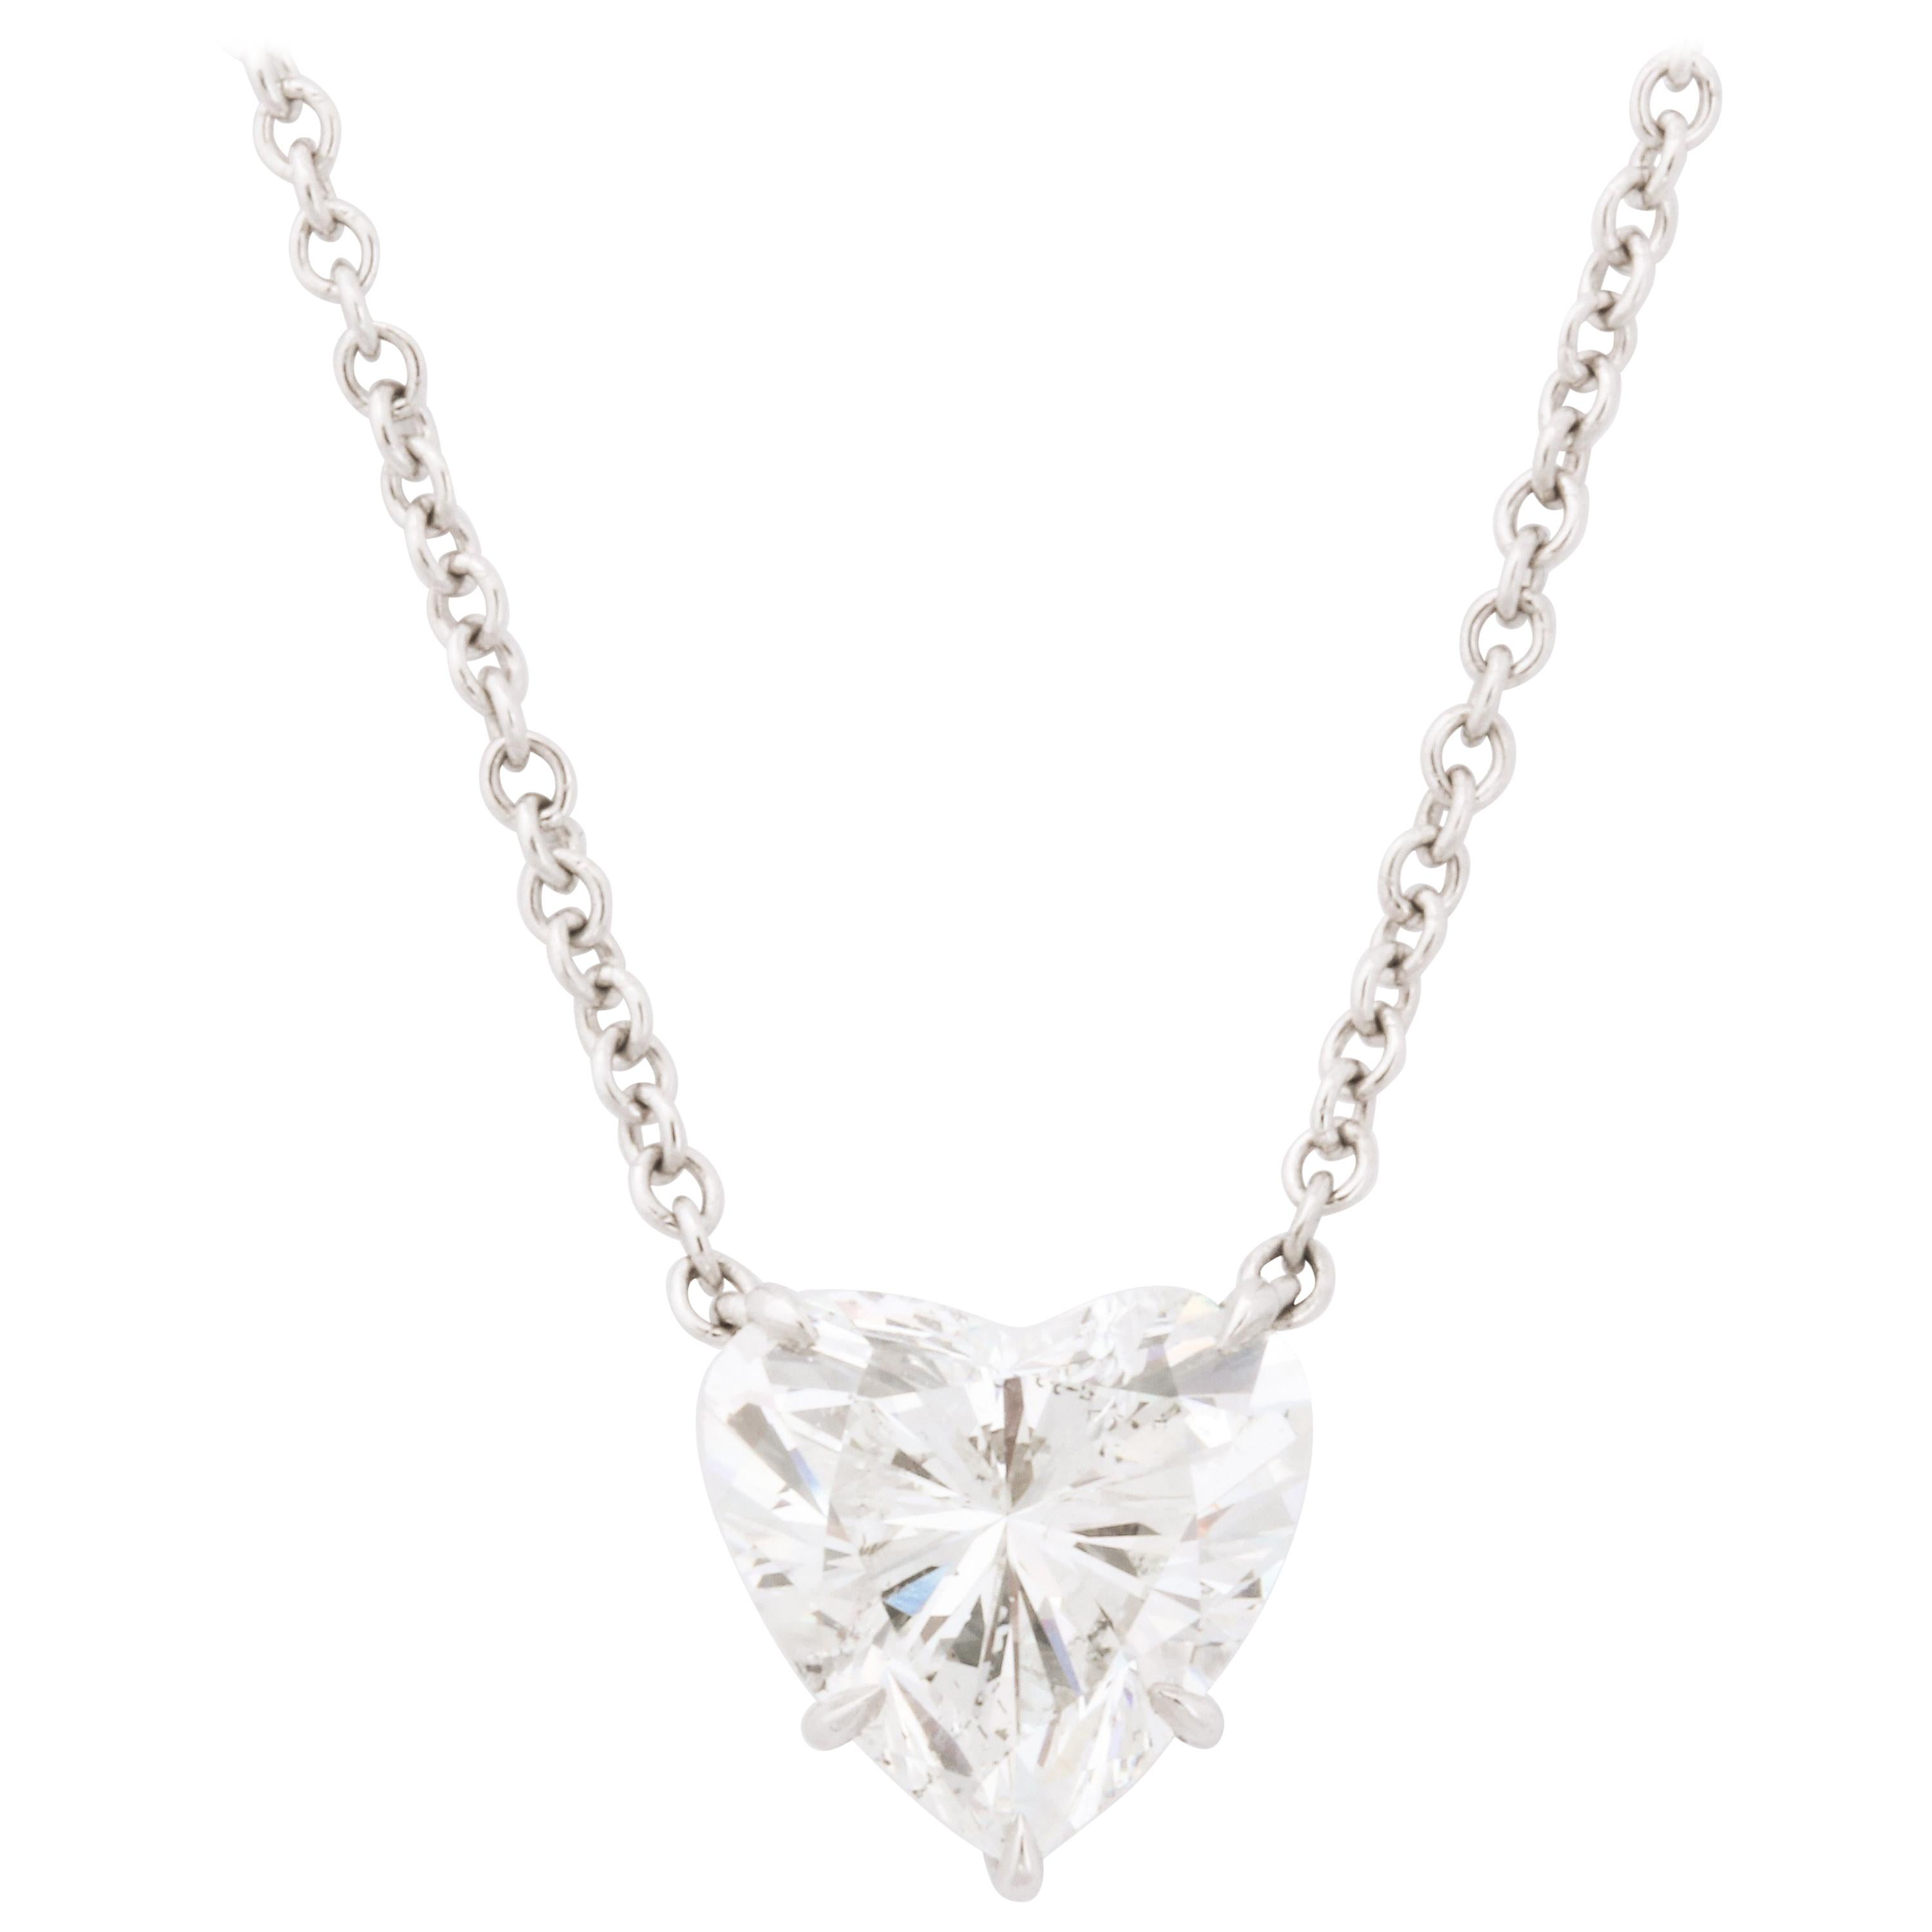 3.60 Carat GIA Certified Heart Shape Diamond Necklace at 1stDibs